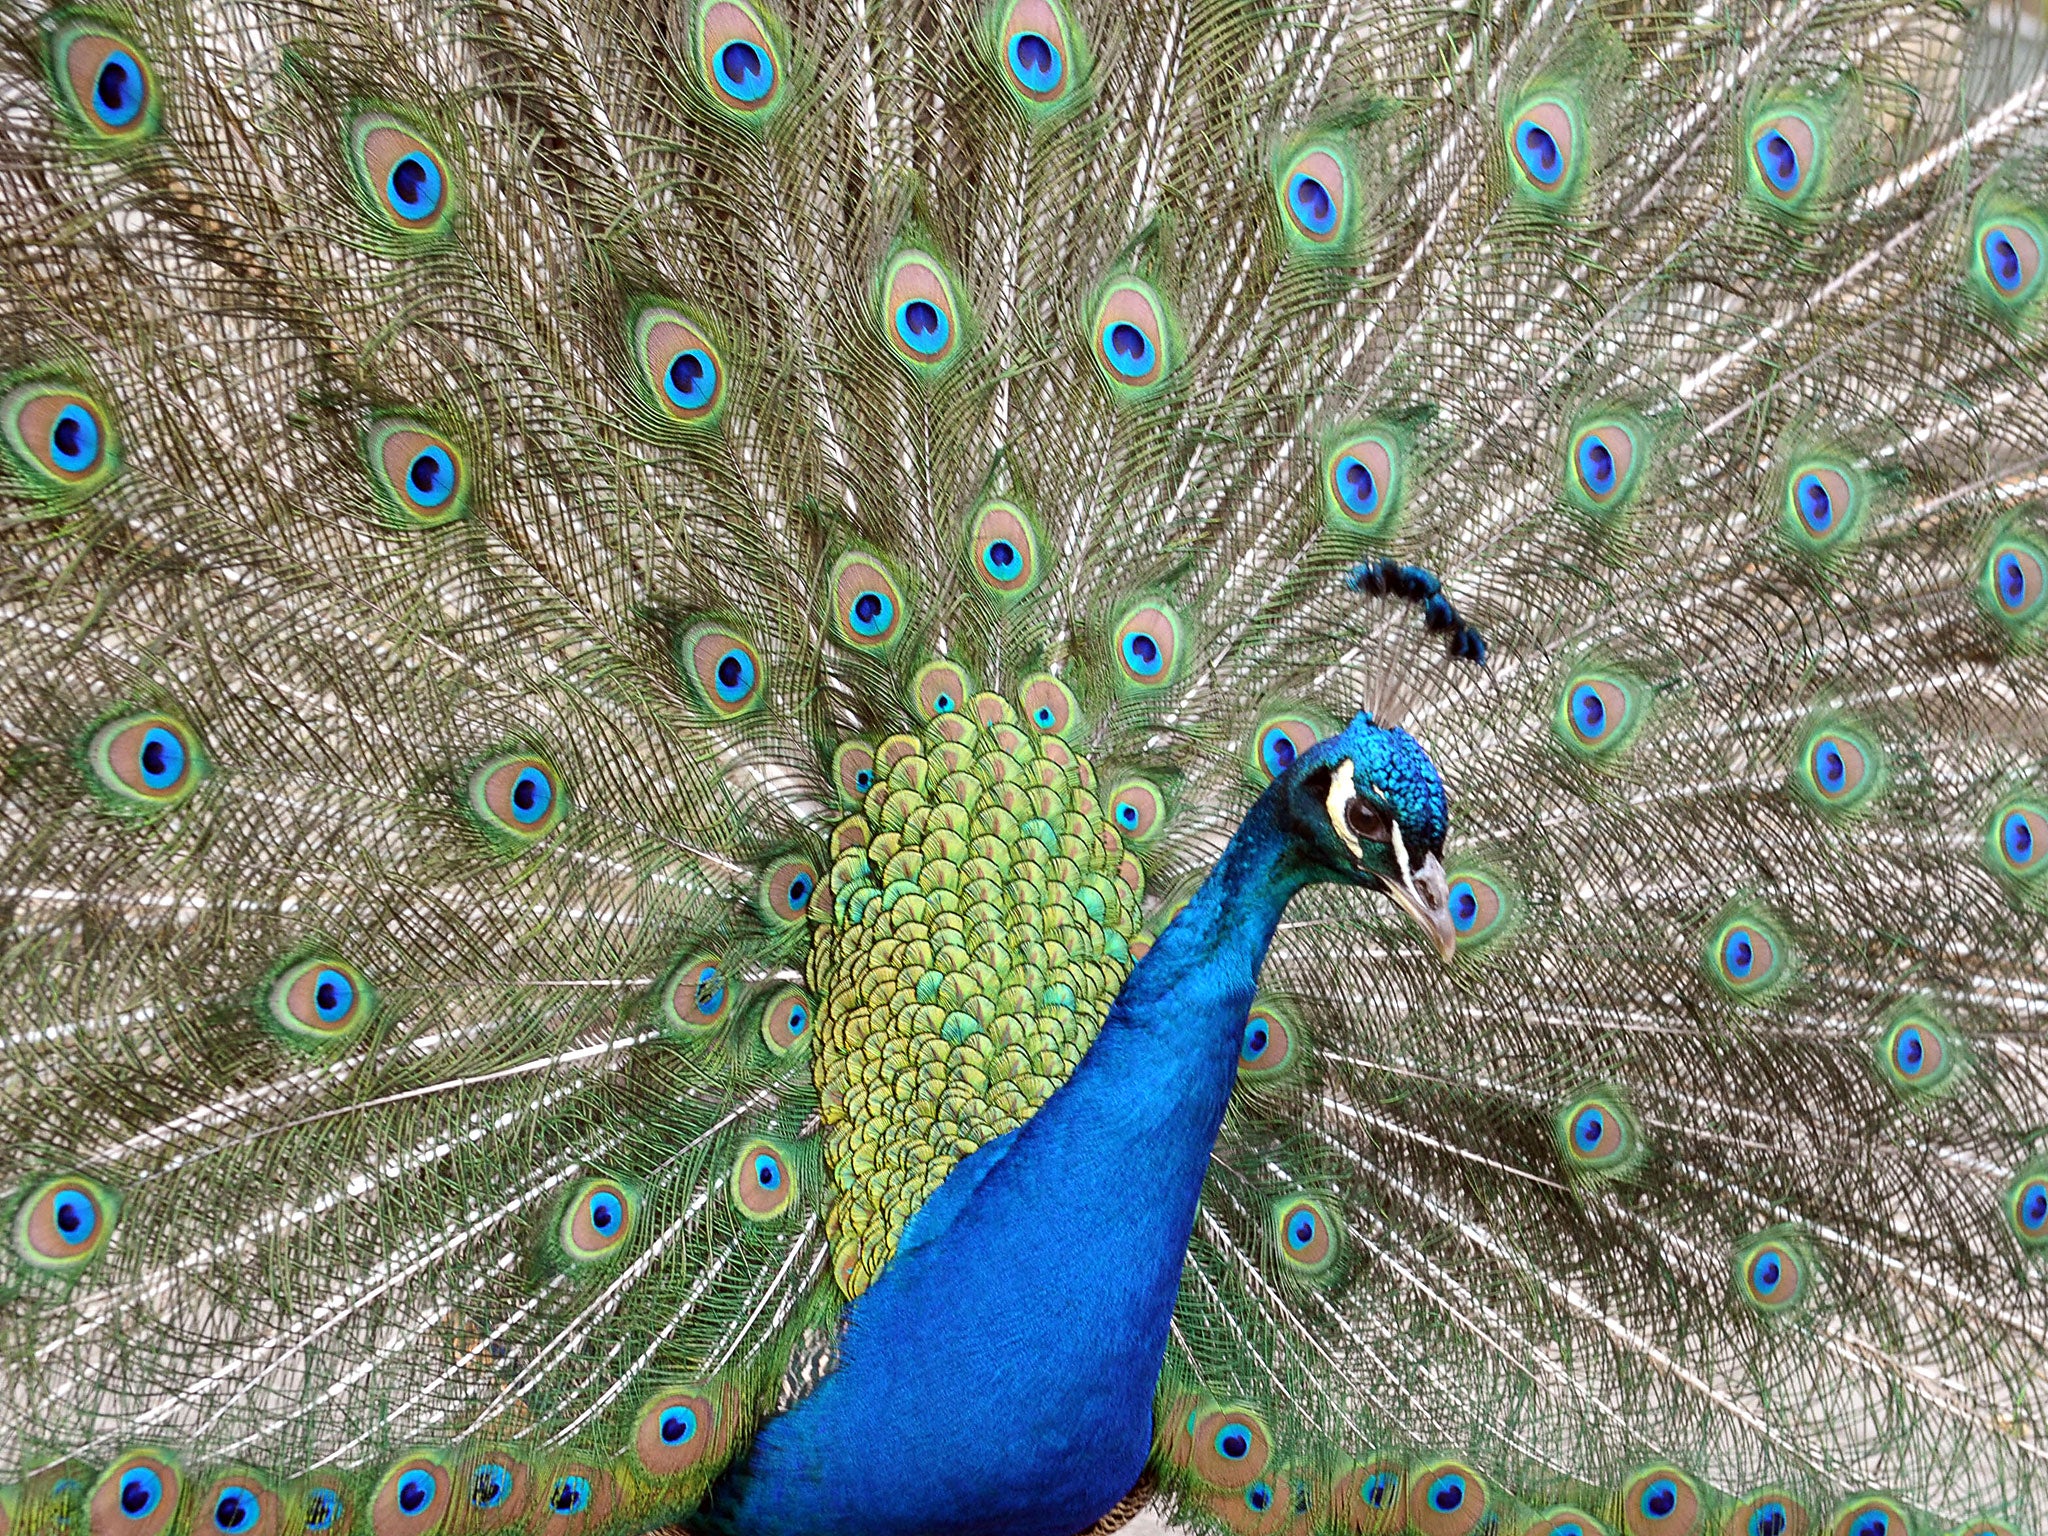 Peacocks make fake sex noises to attract the attention of females, according to scientists.